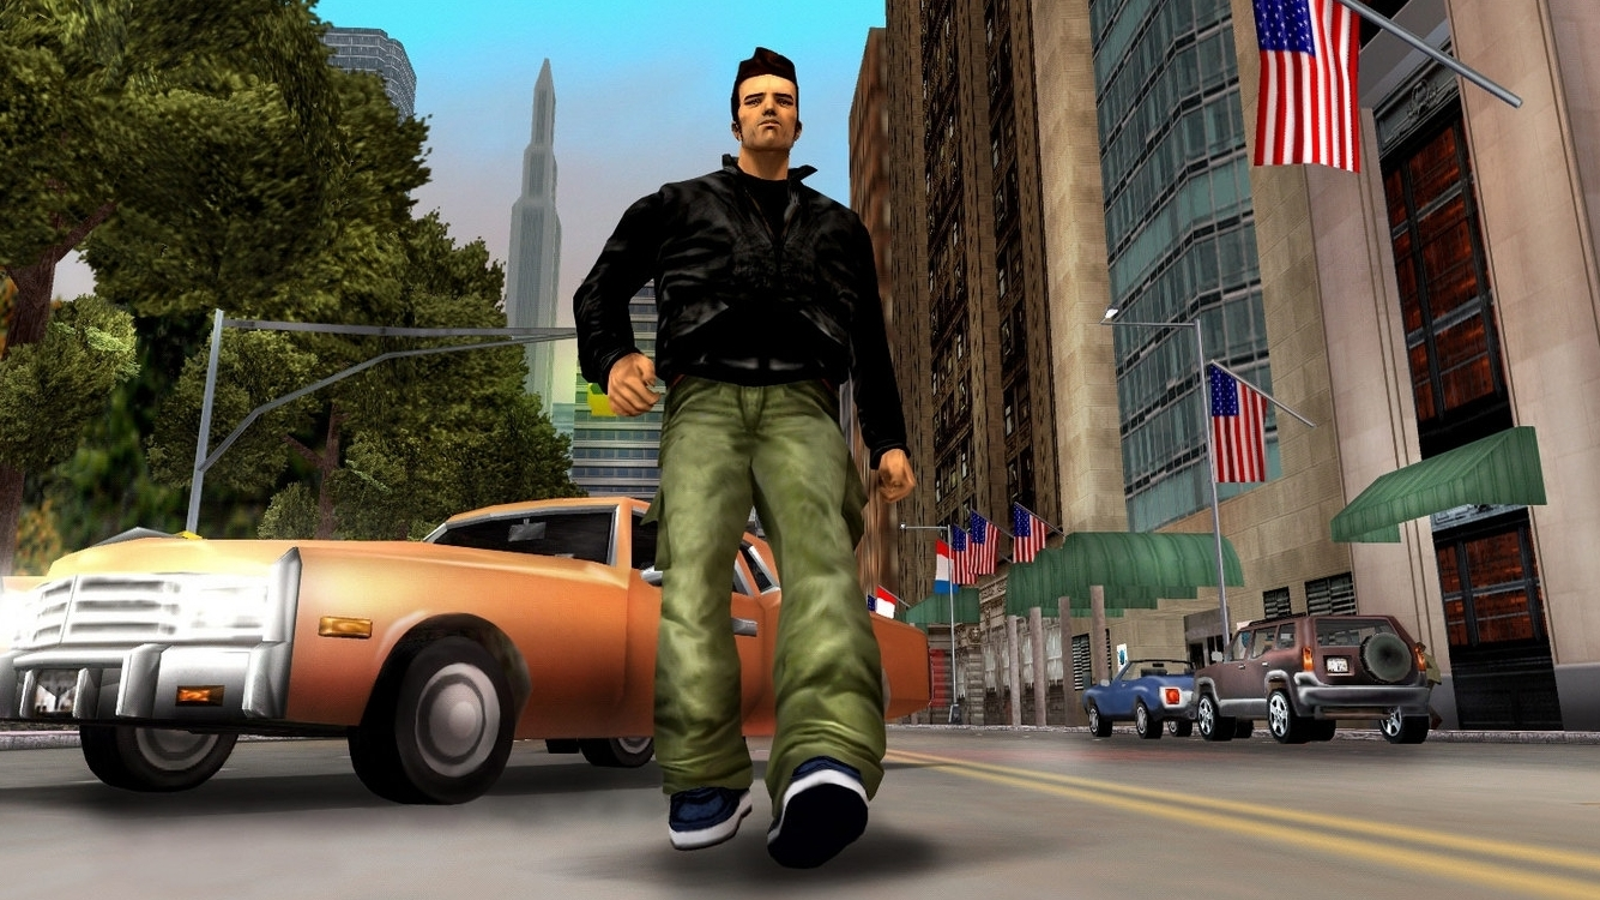 GTA 3, Vice City, and San Andreas remasters are reportedly in the